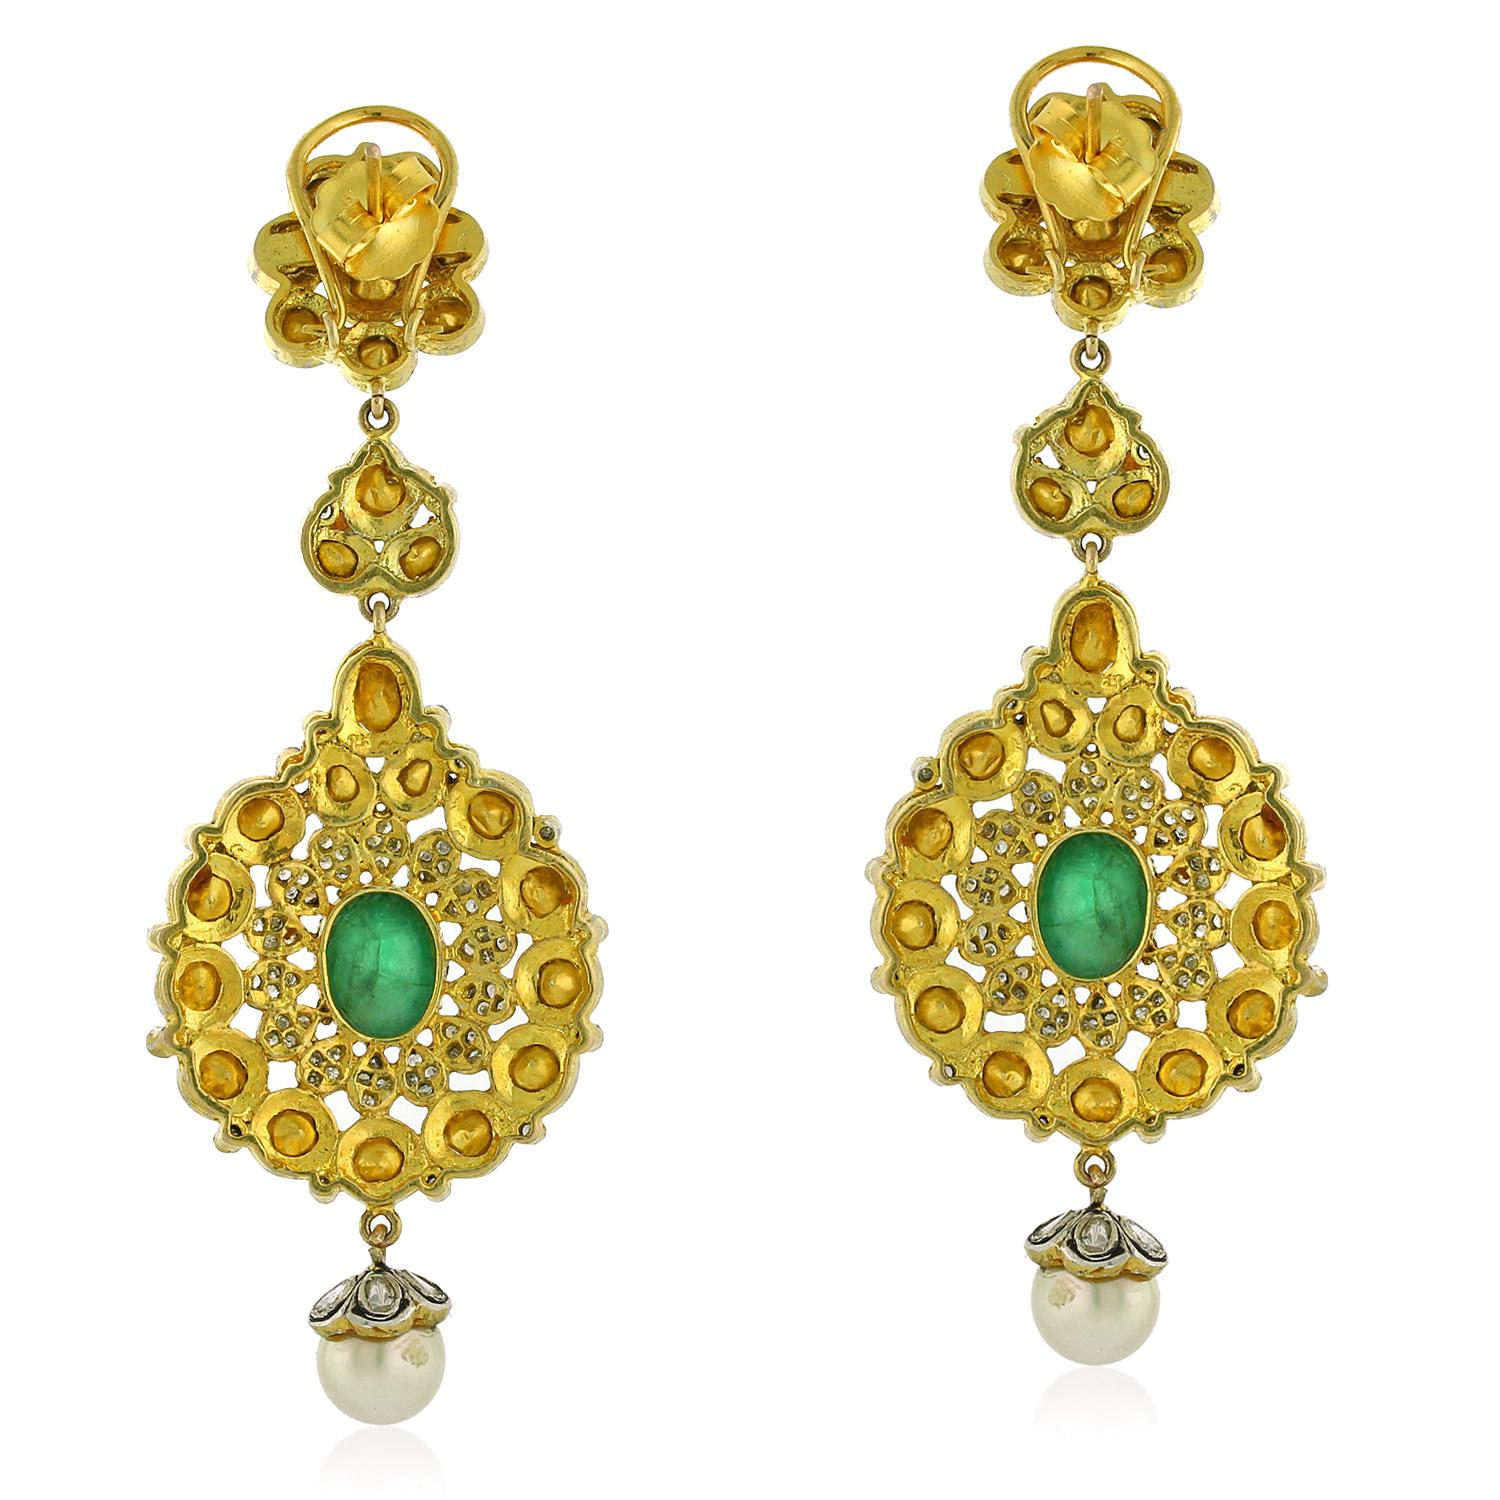 This earring set with emerald and pearl made in gold and silver is a piece of jewelry that features a combination of polki diamonds, emeralds, and pearls set in a gold and silver earring design. Polki diamonds are uncut diamonds that are